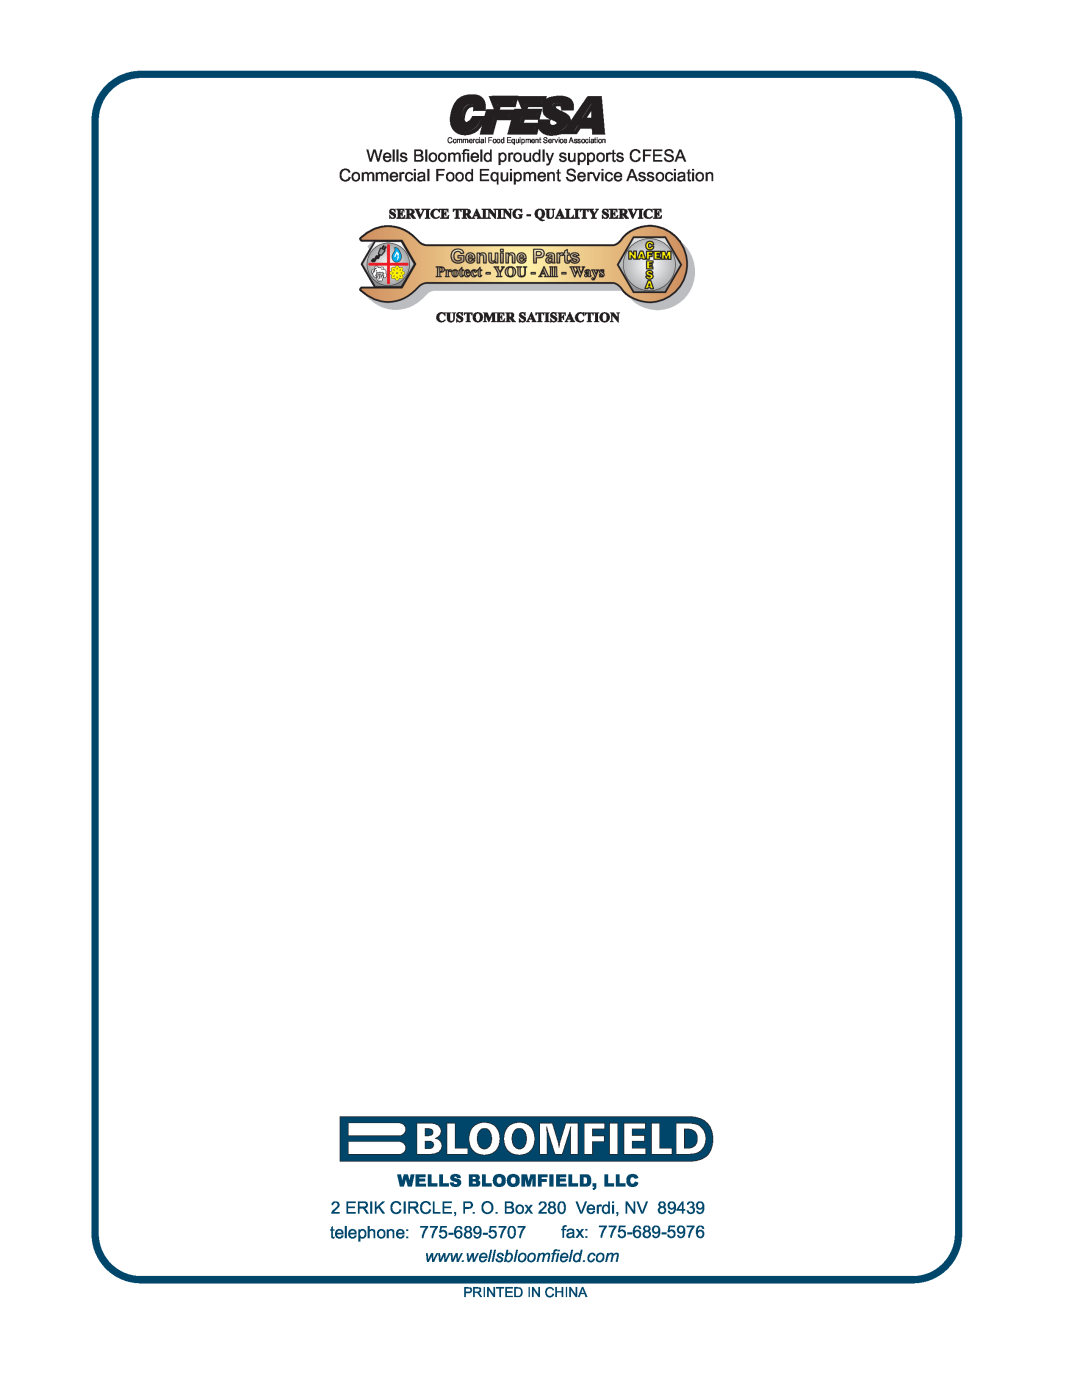 Bloomfield 8852 Wells Bloomfield proudly supports CFESA, Commercial Food Equipment Service Association, Genuine Parts 